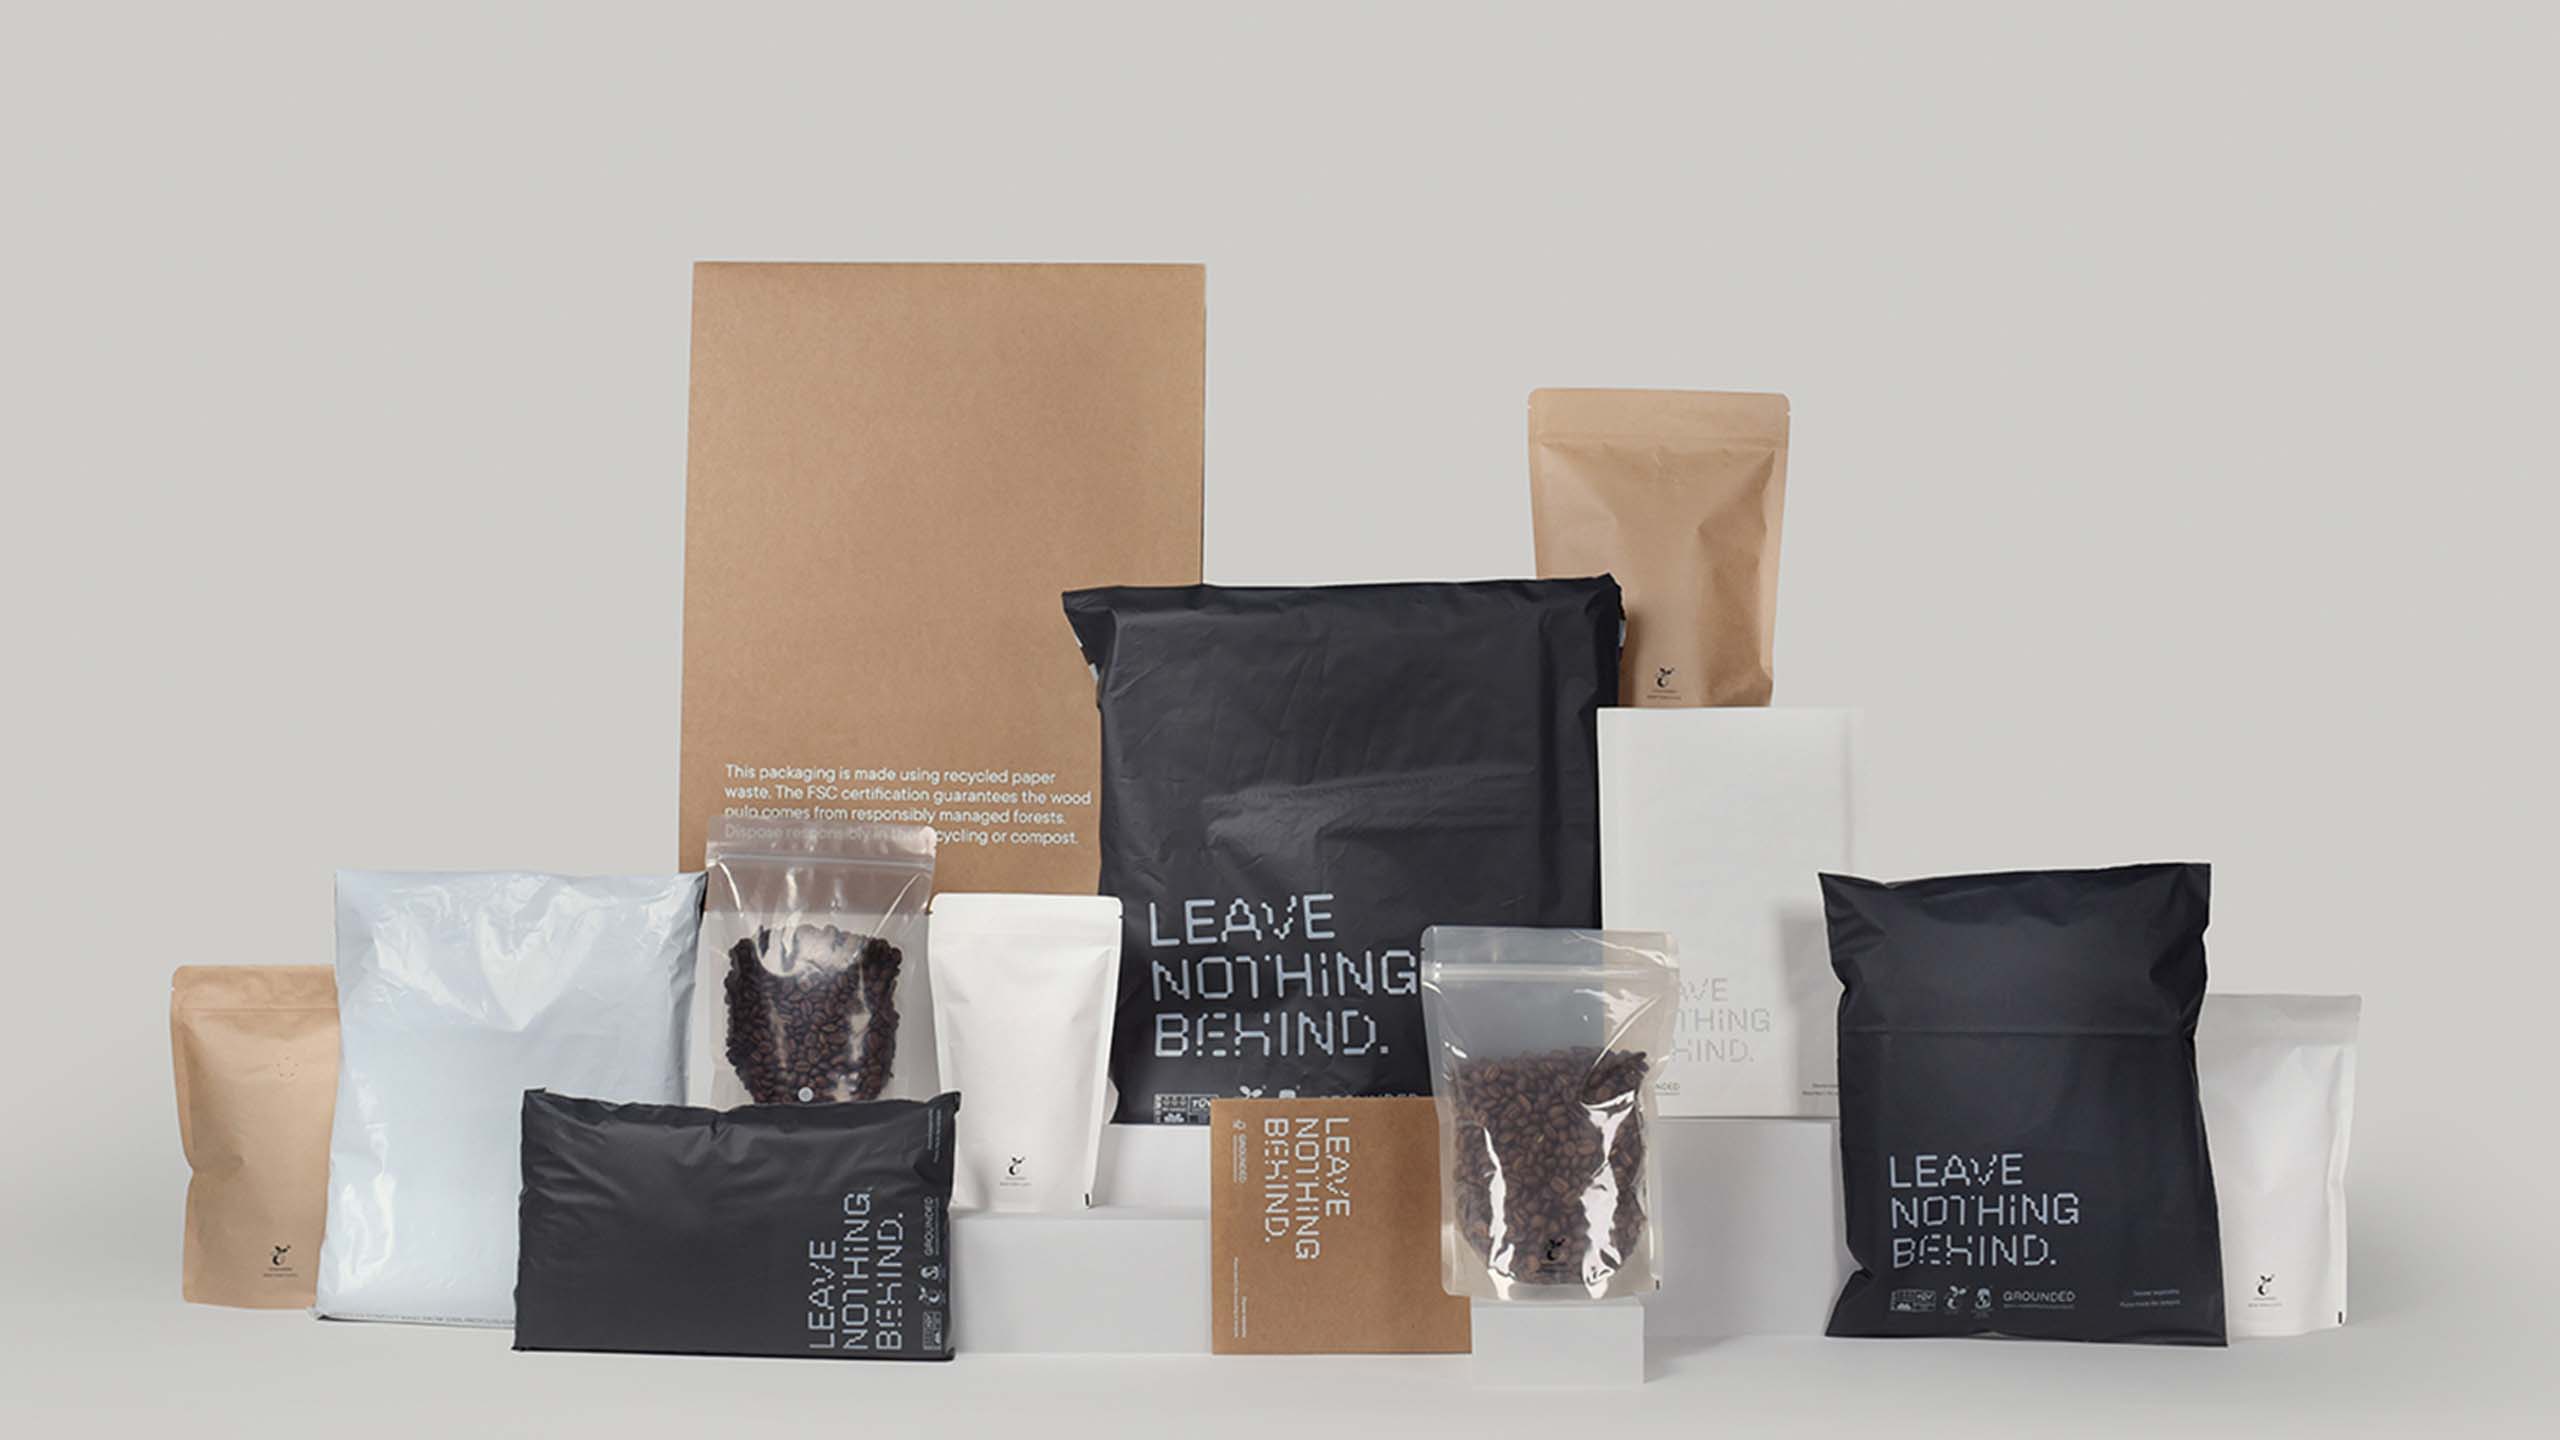 Is Paper A More Sustainable Flexible Packaging Material Than Plastic?